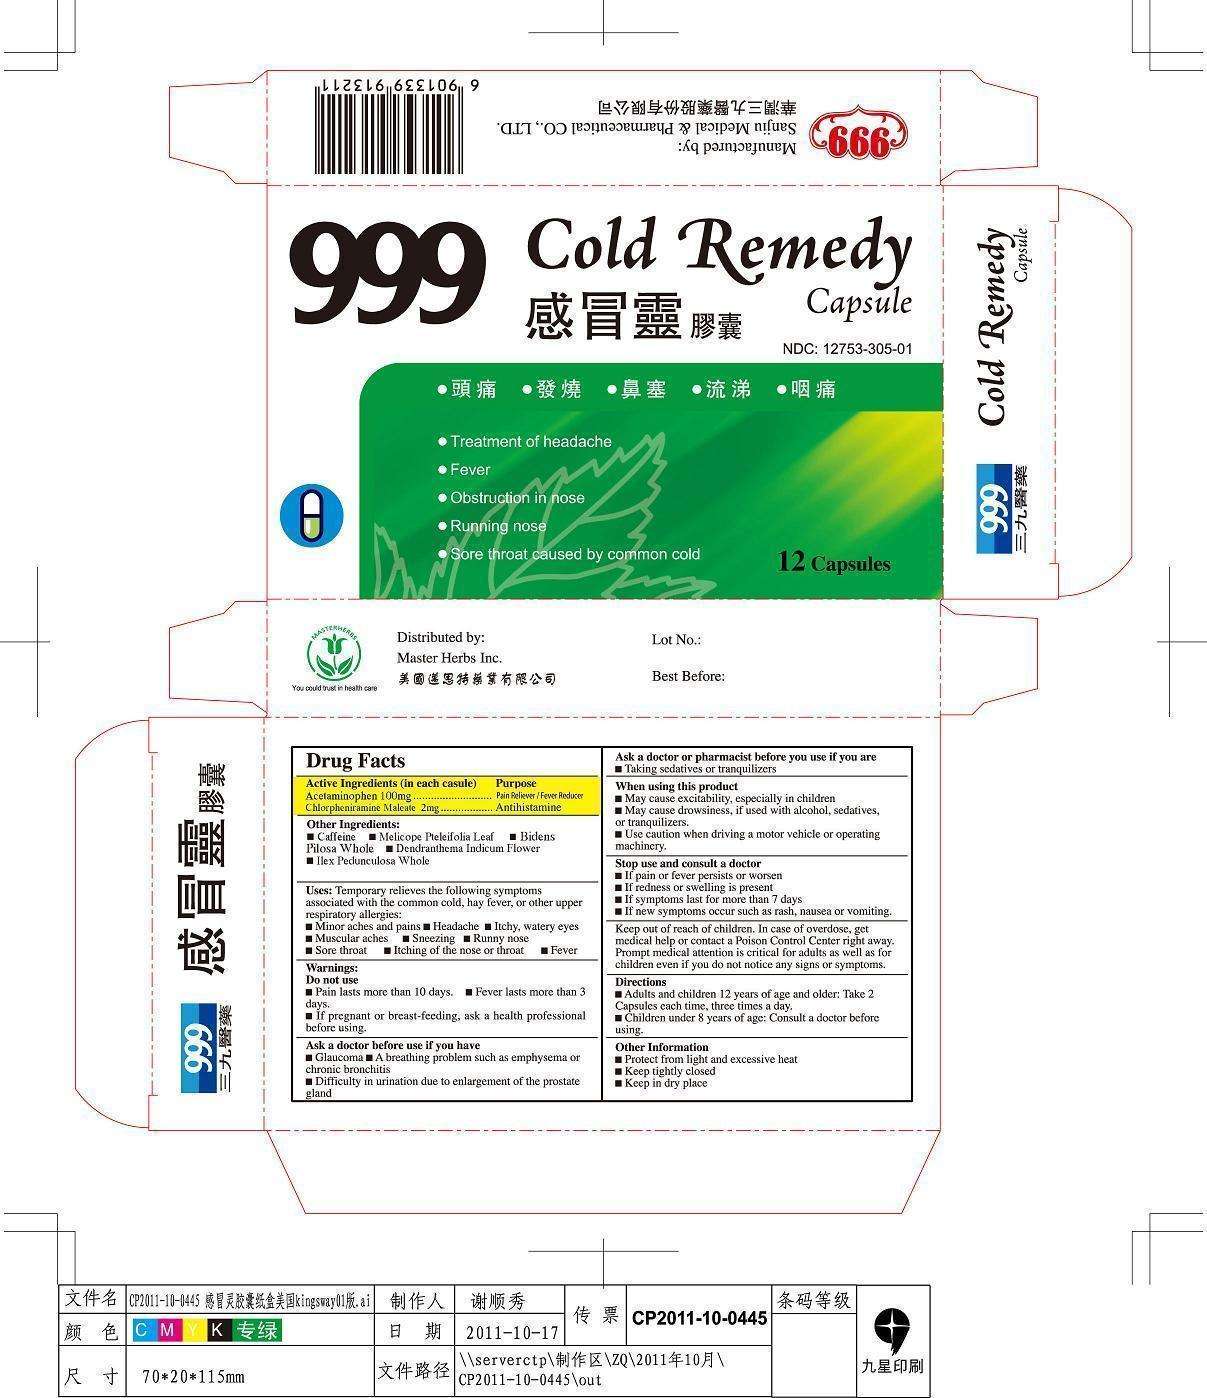 999 COLD REMEDY